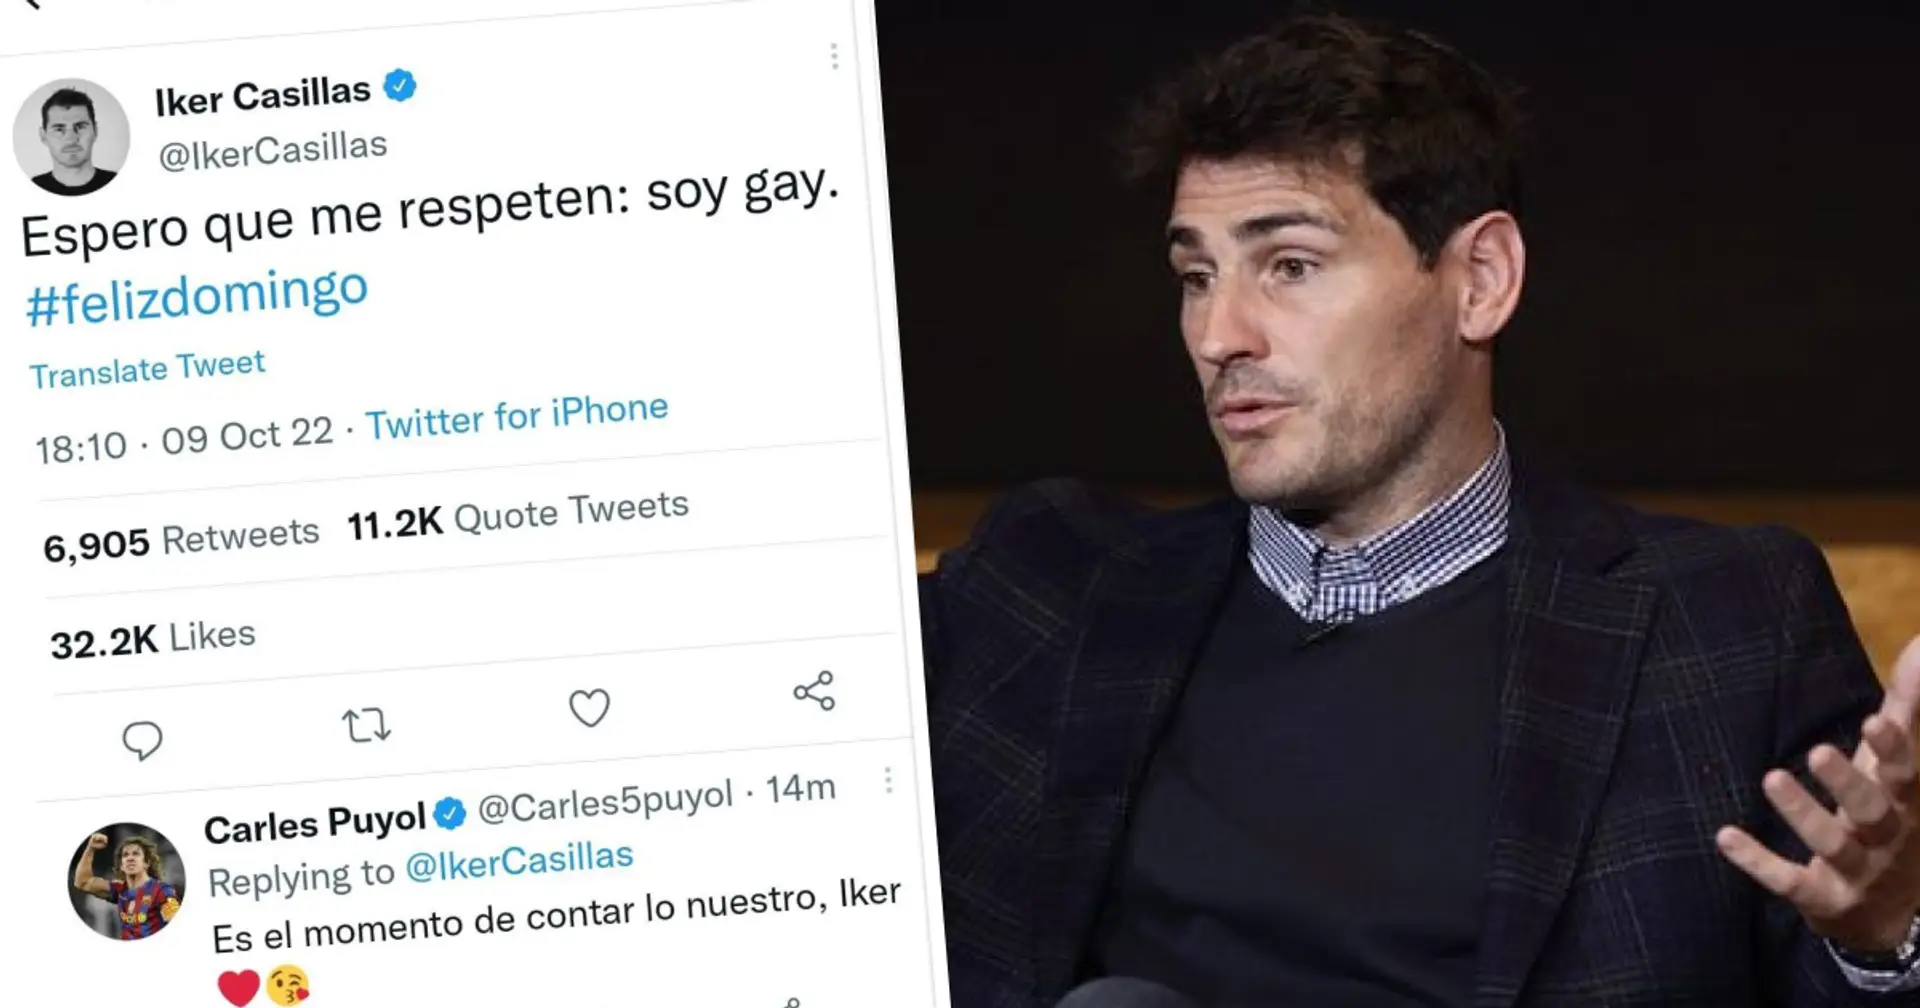 Casillas deletes provocative tweet after being slammed by fans. What is going on? Explained.